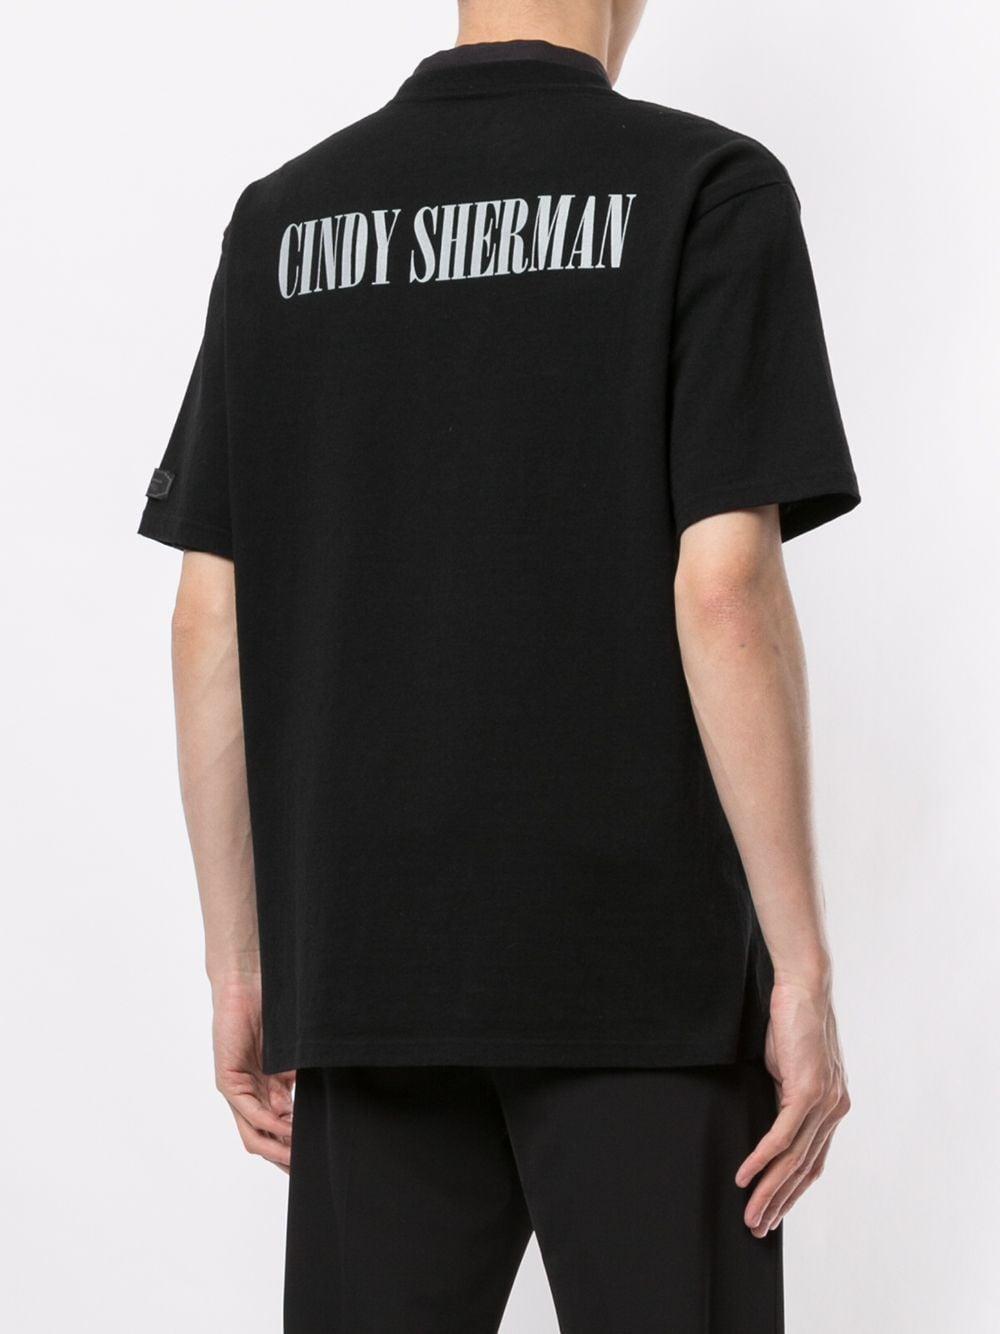 Undercover Cotton Cindy Sherman Crew-neck T-shirt in Black for Men - Lyst